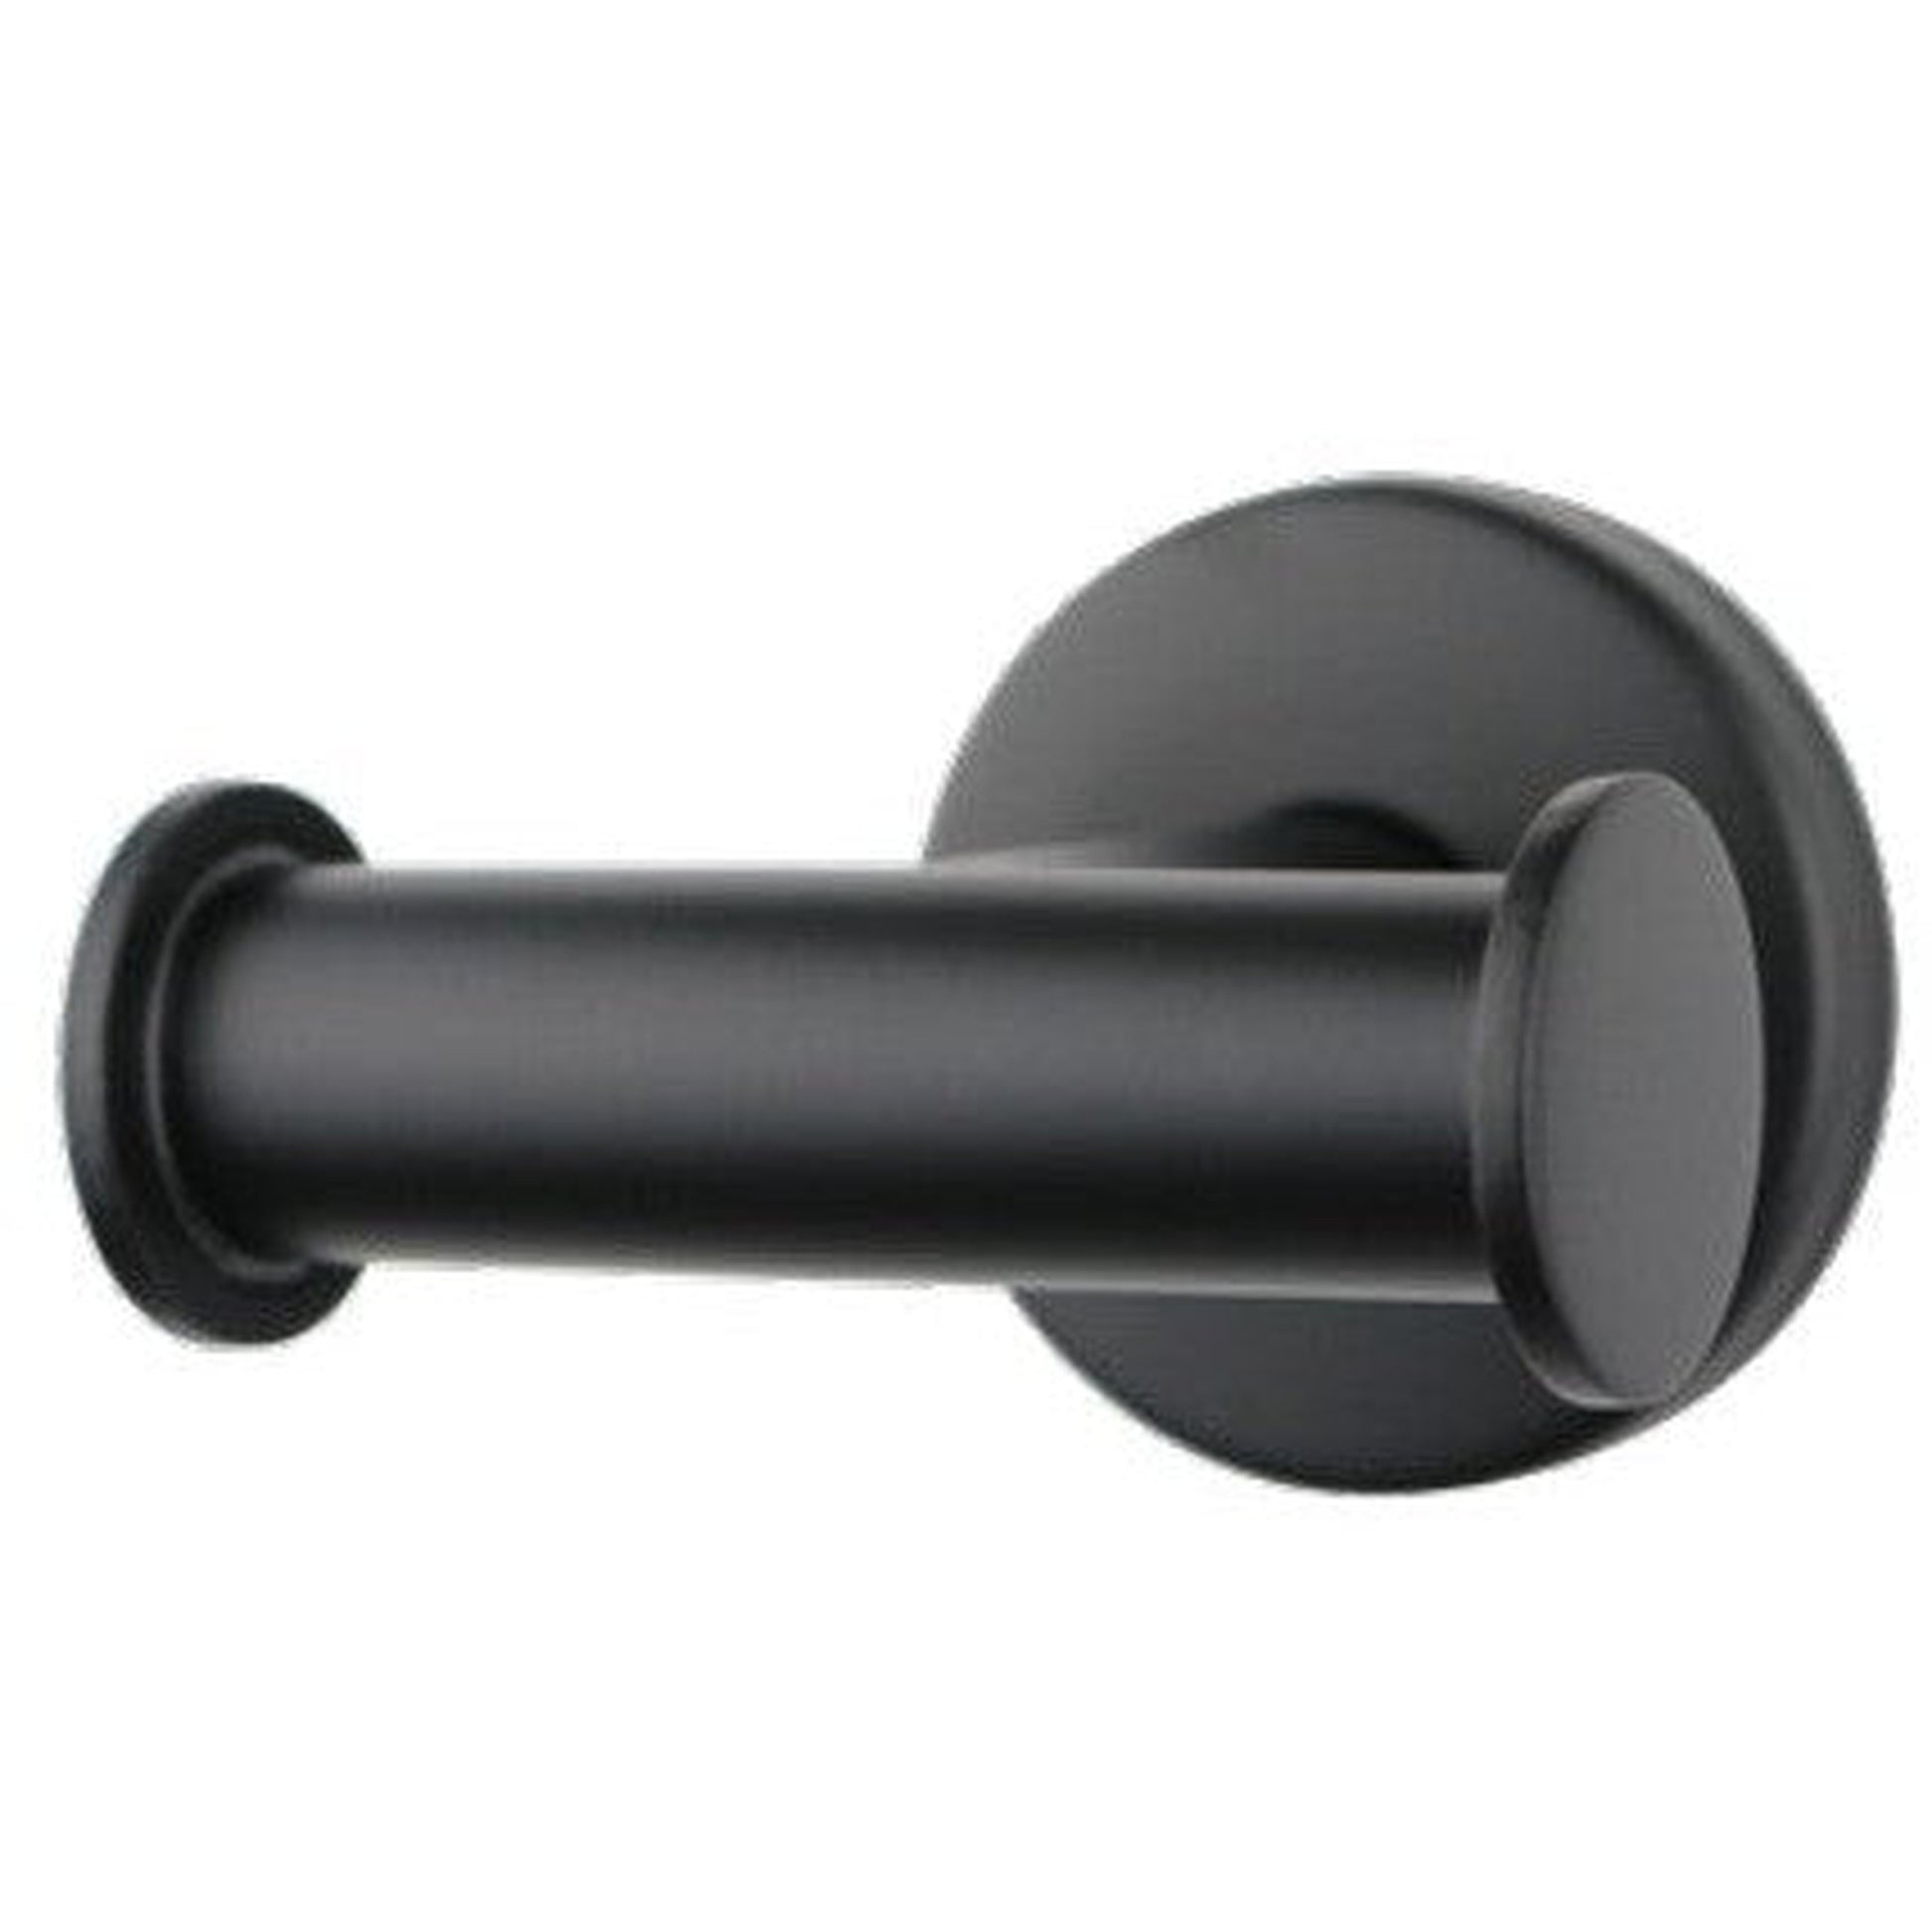 Seachrome Conorado Series 3.5" Matte Black Powder Coat Concealed Mounting Flange Double Robe Hook